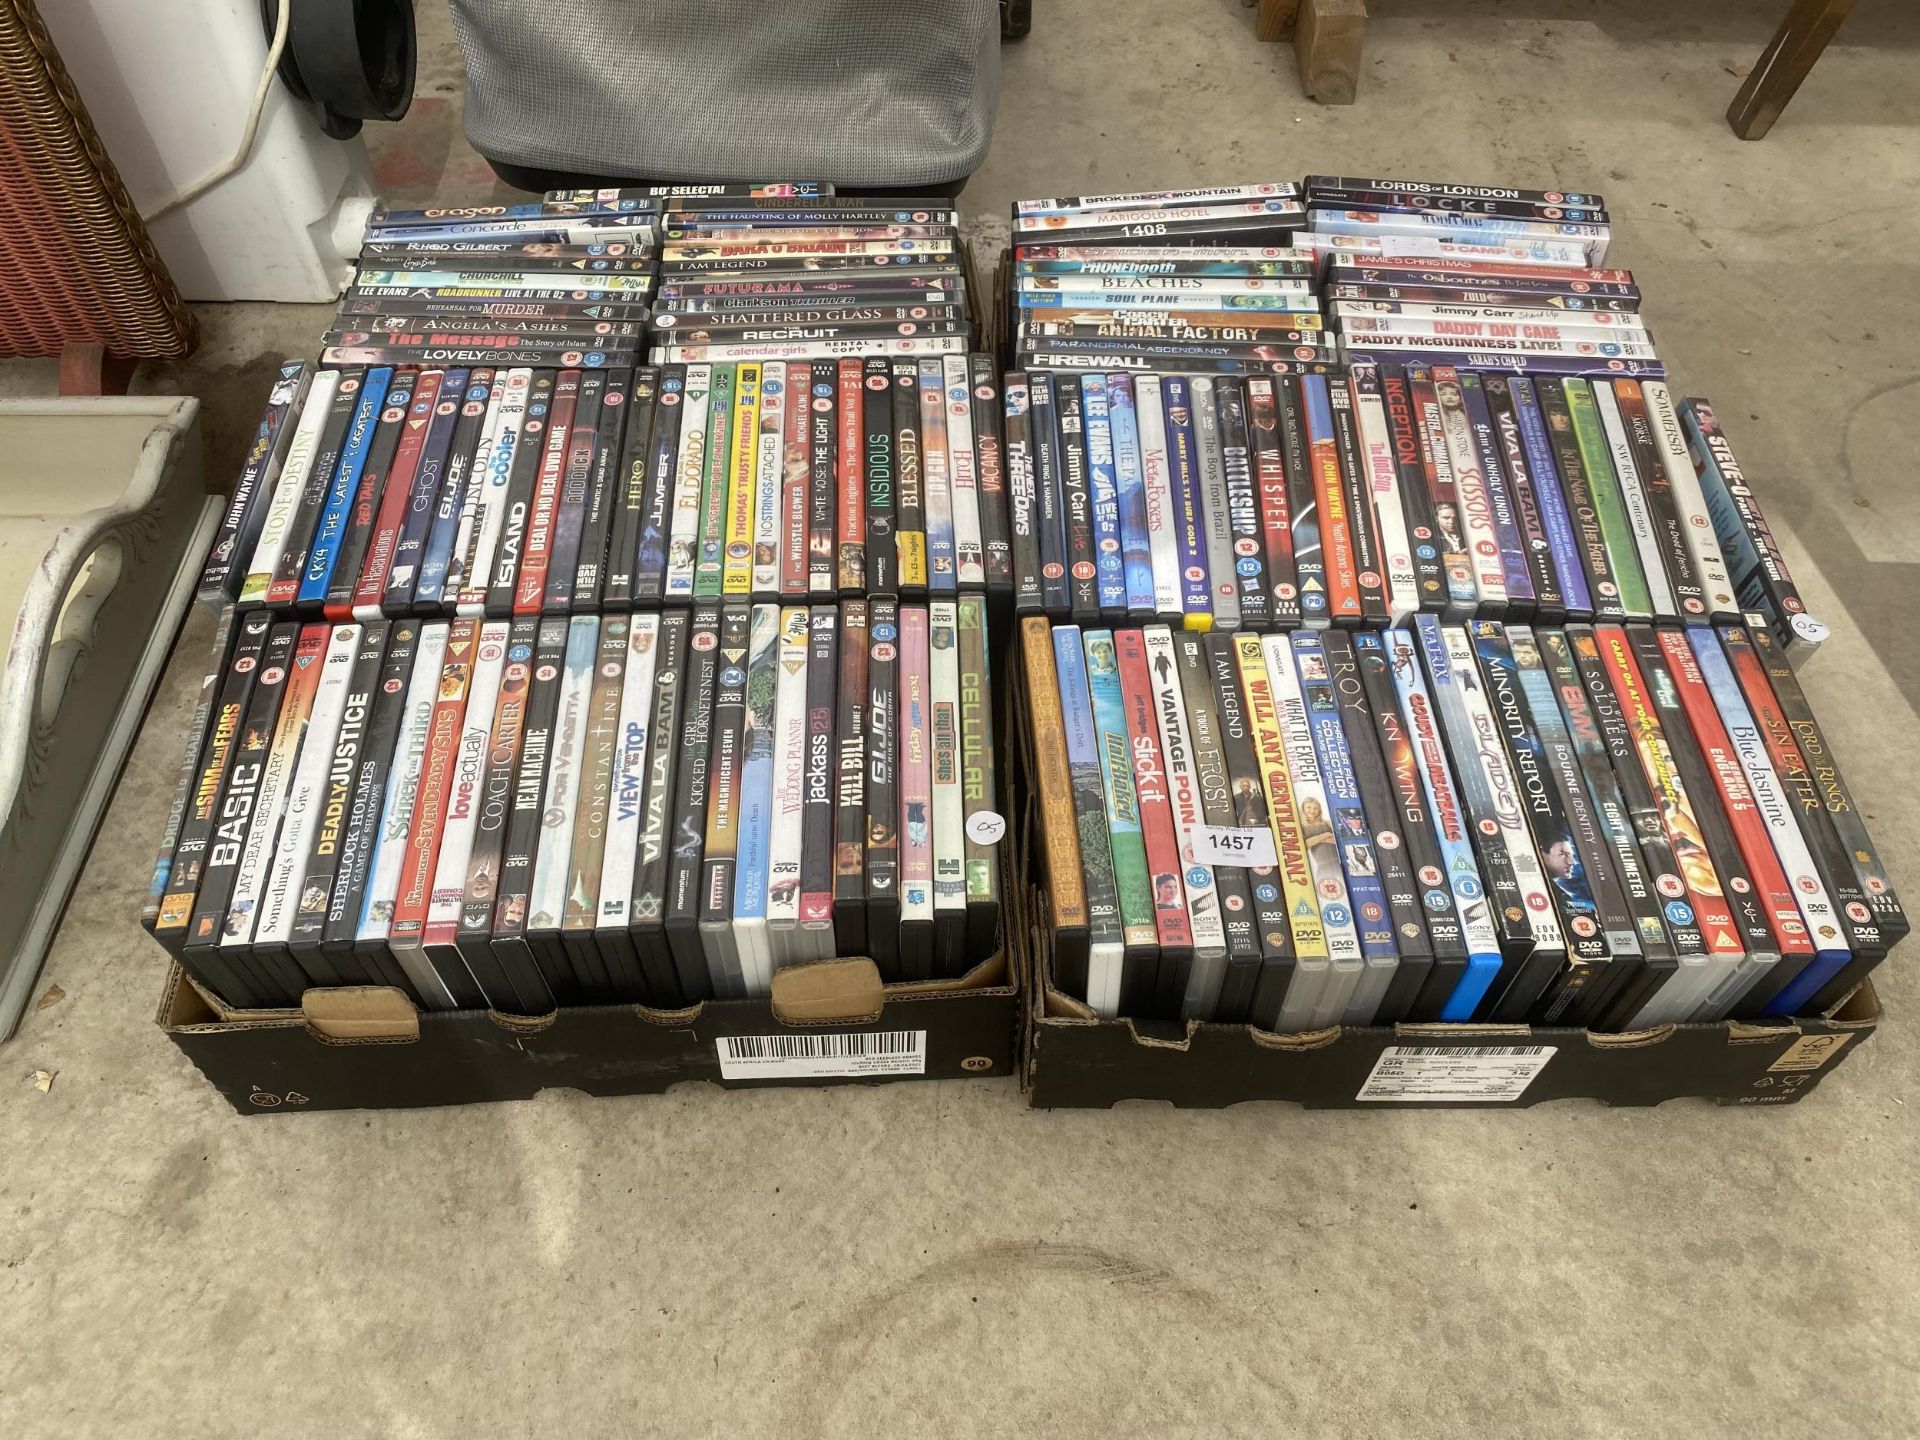 A LARGE ASSORTMENT OF DVDS